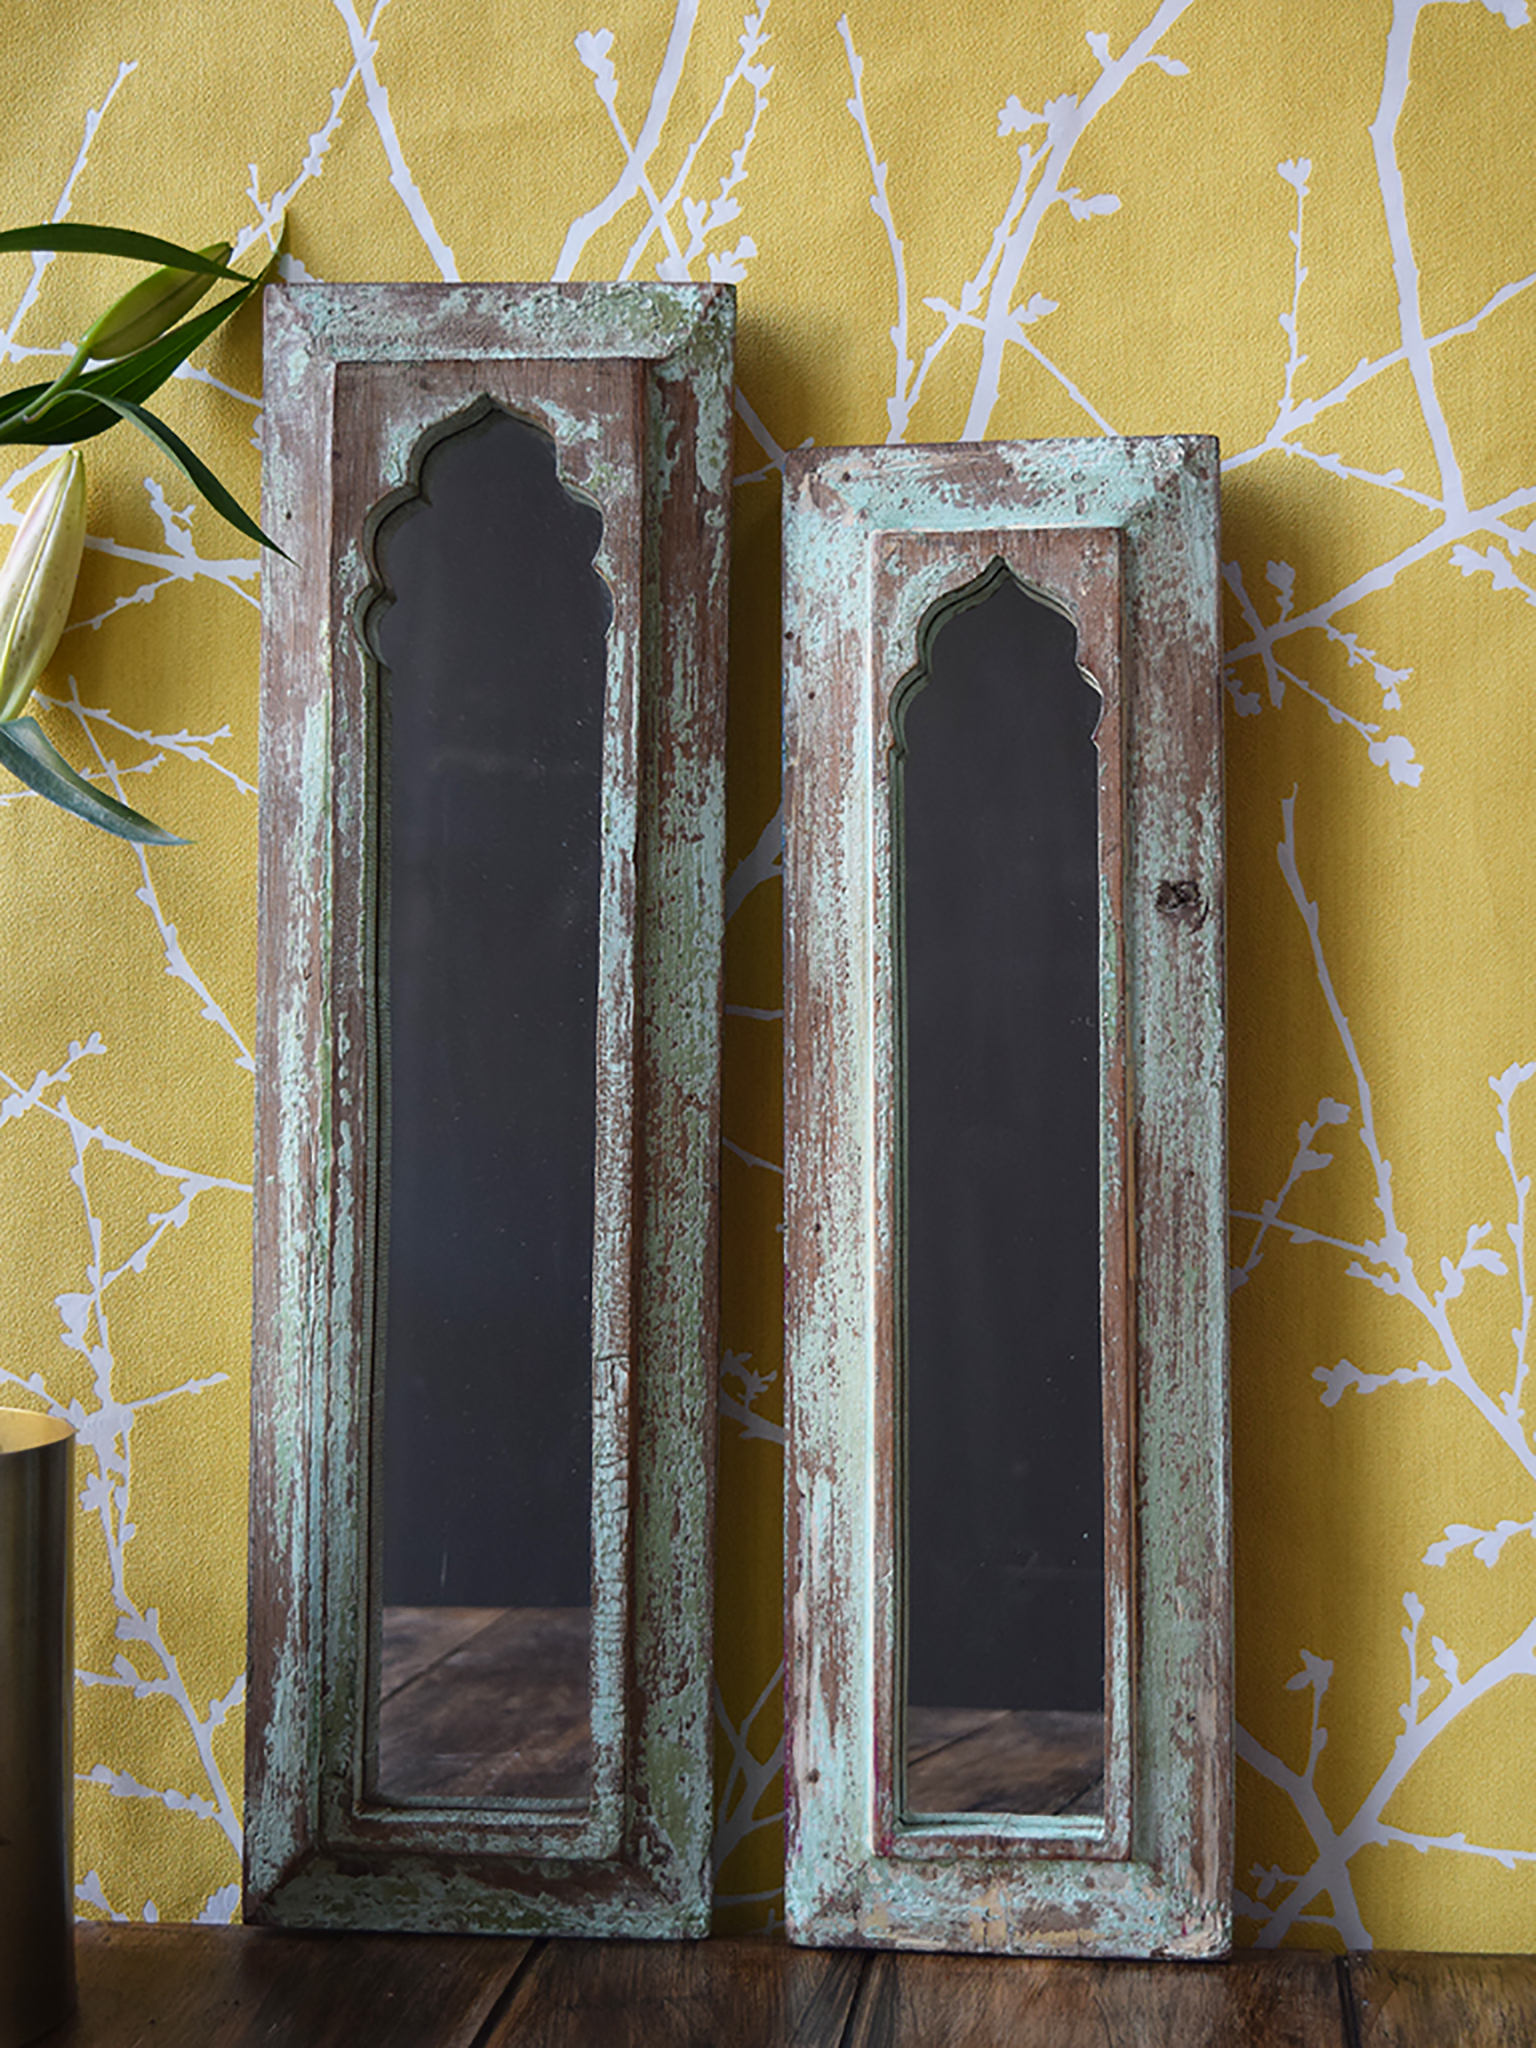 Rustic mint distressed mirrors - pair or single